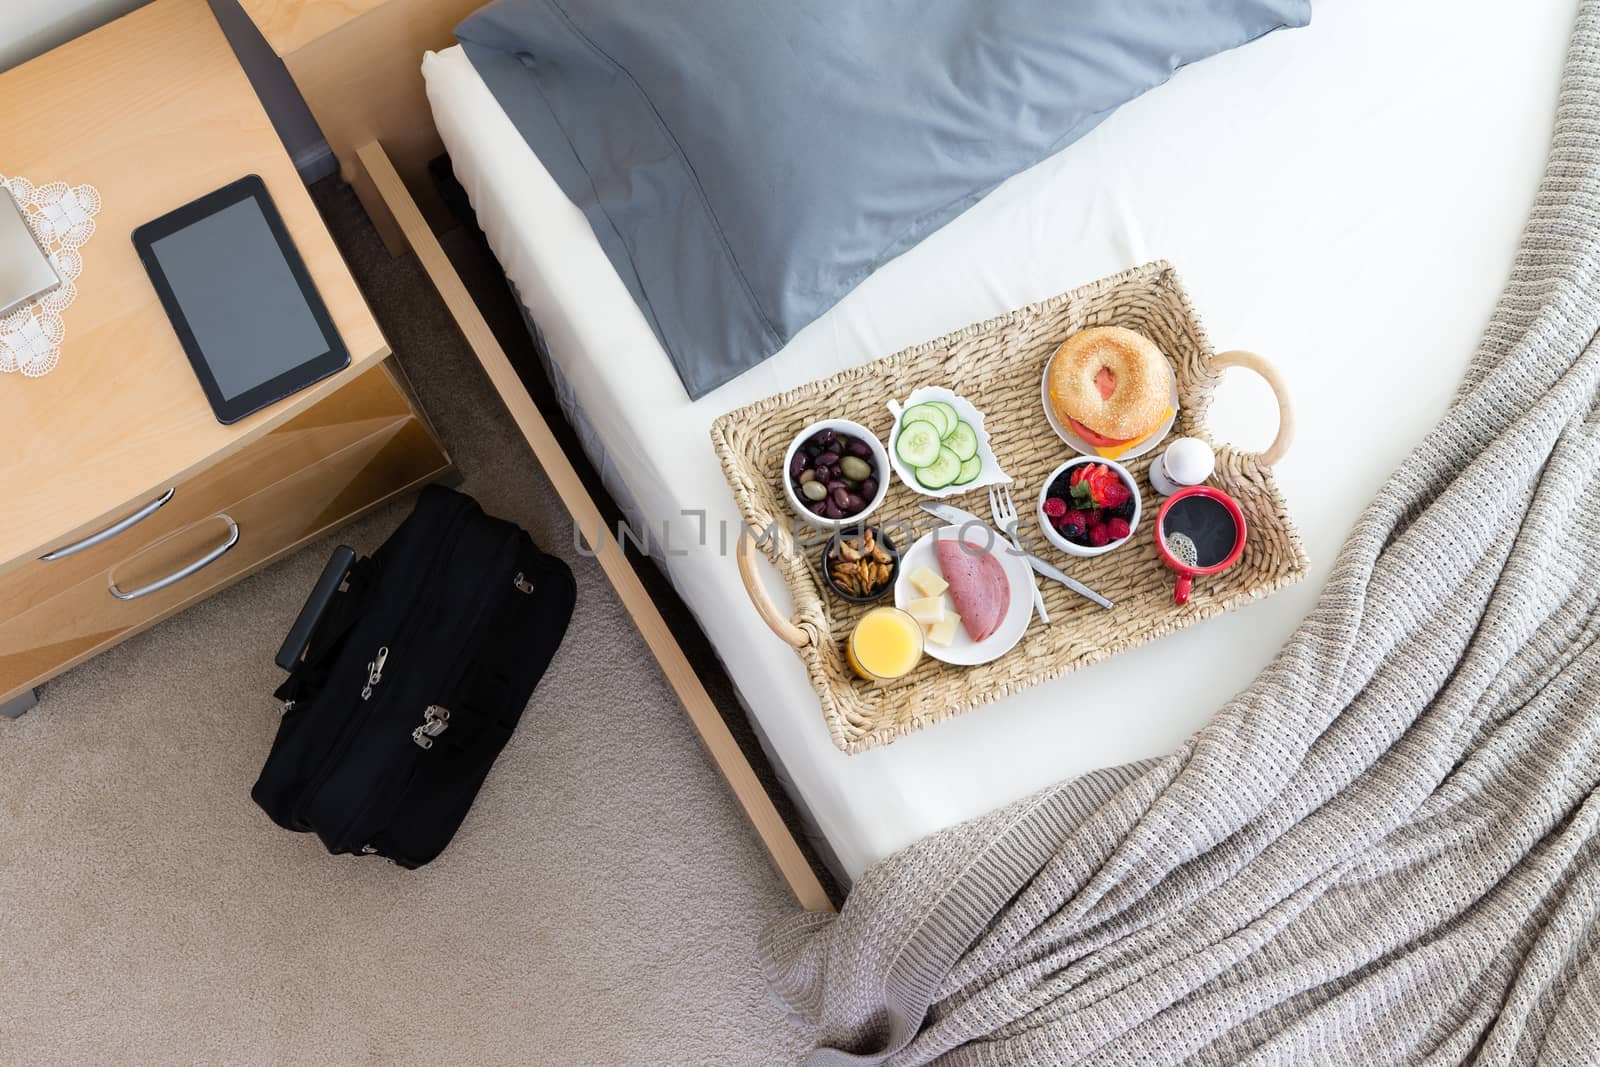 Business Travel Hotel Room with Breakfast in Bed by coskun